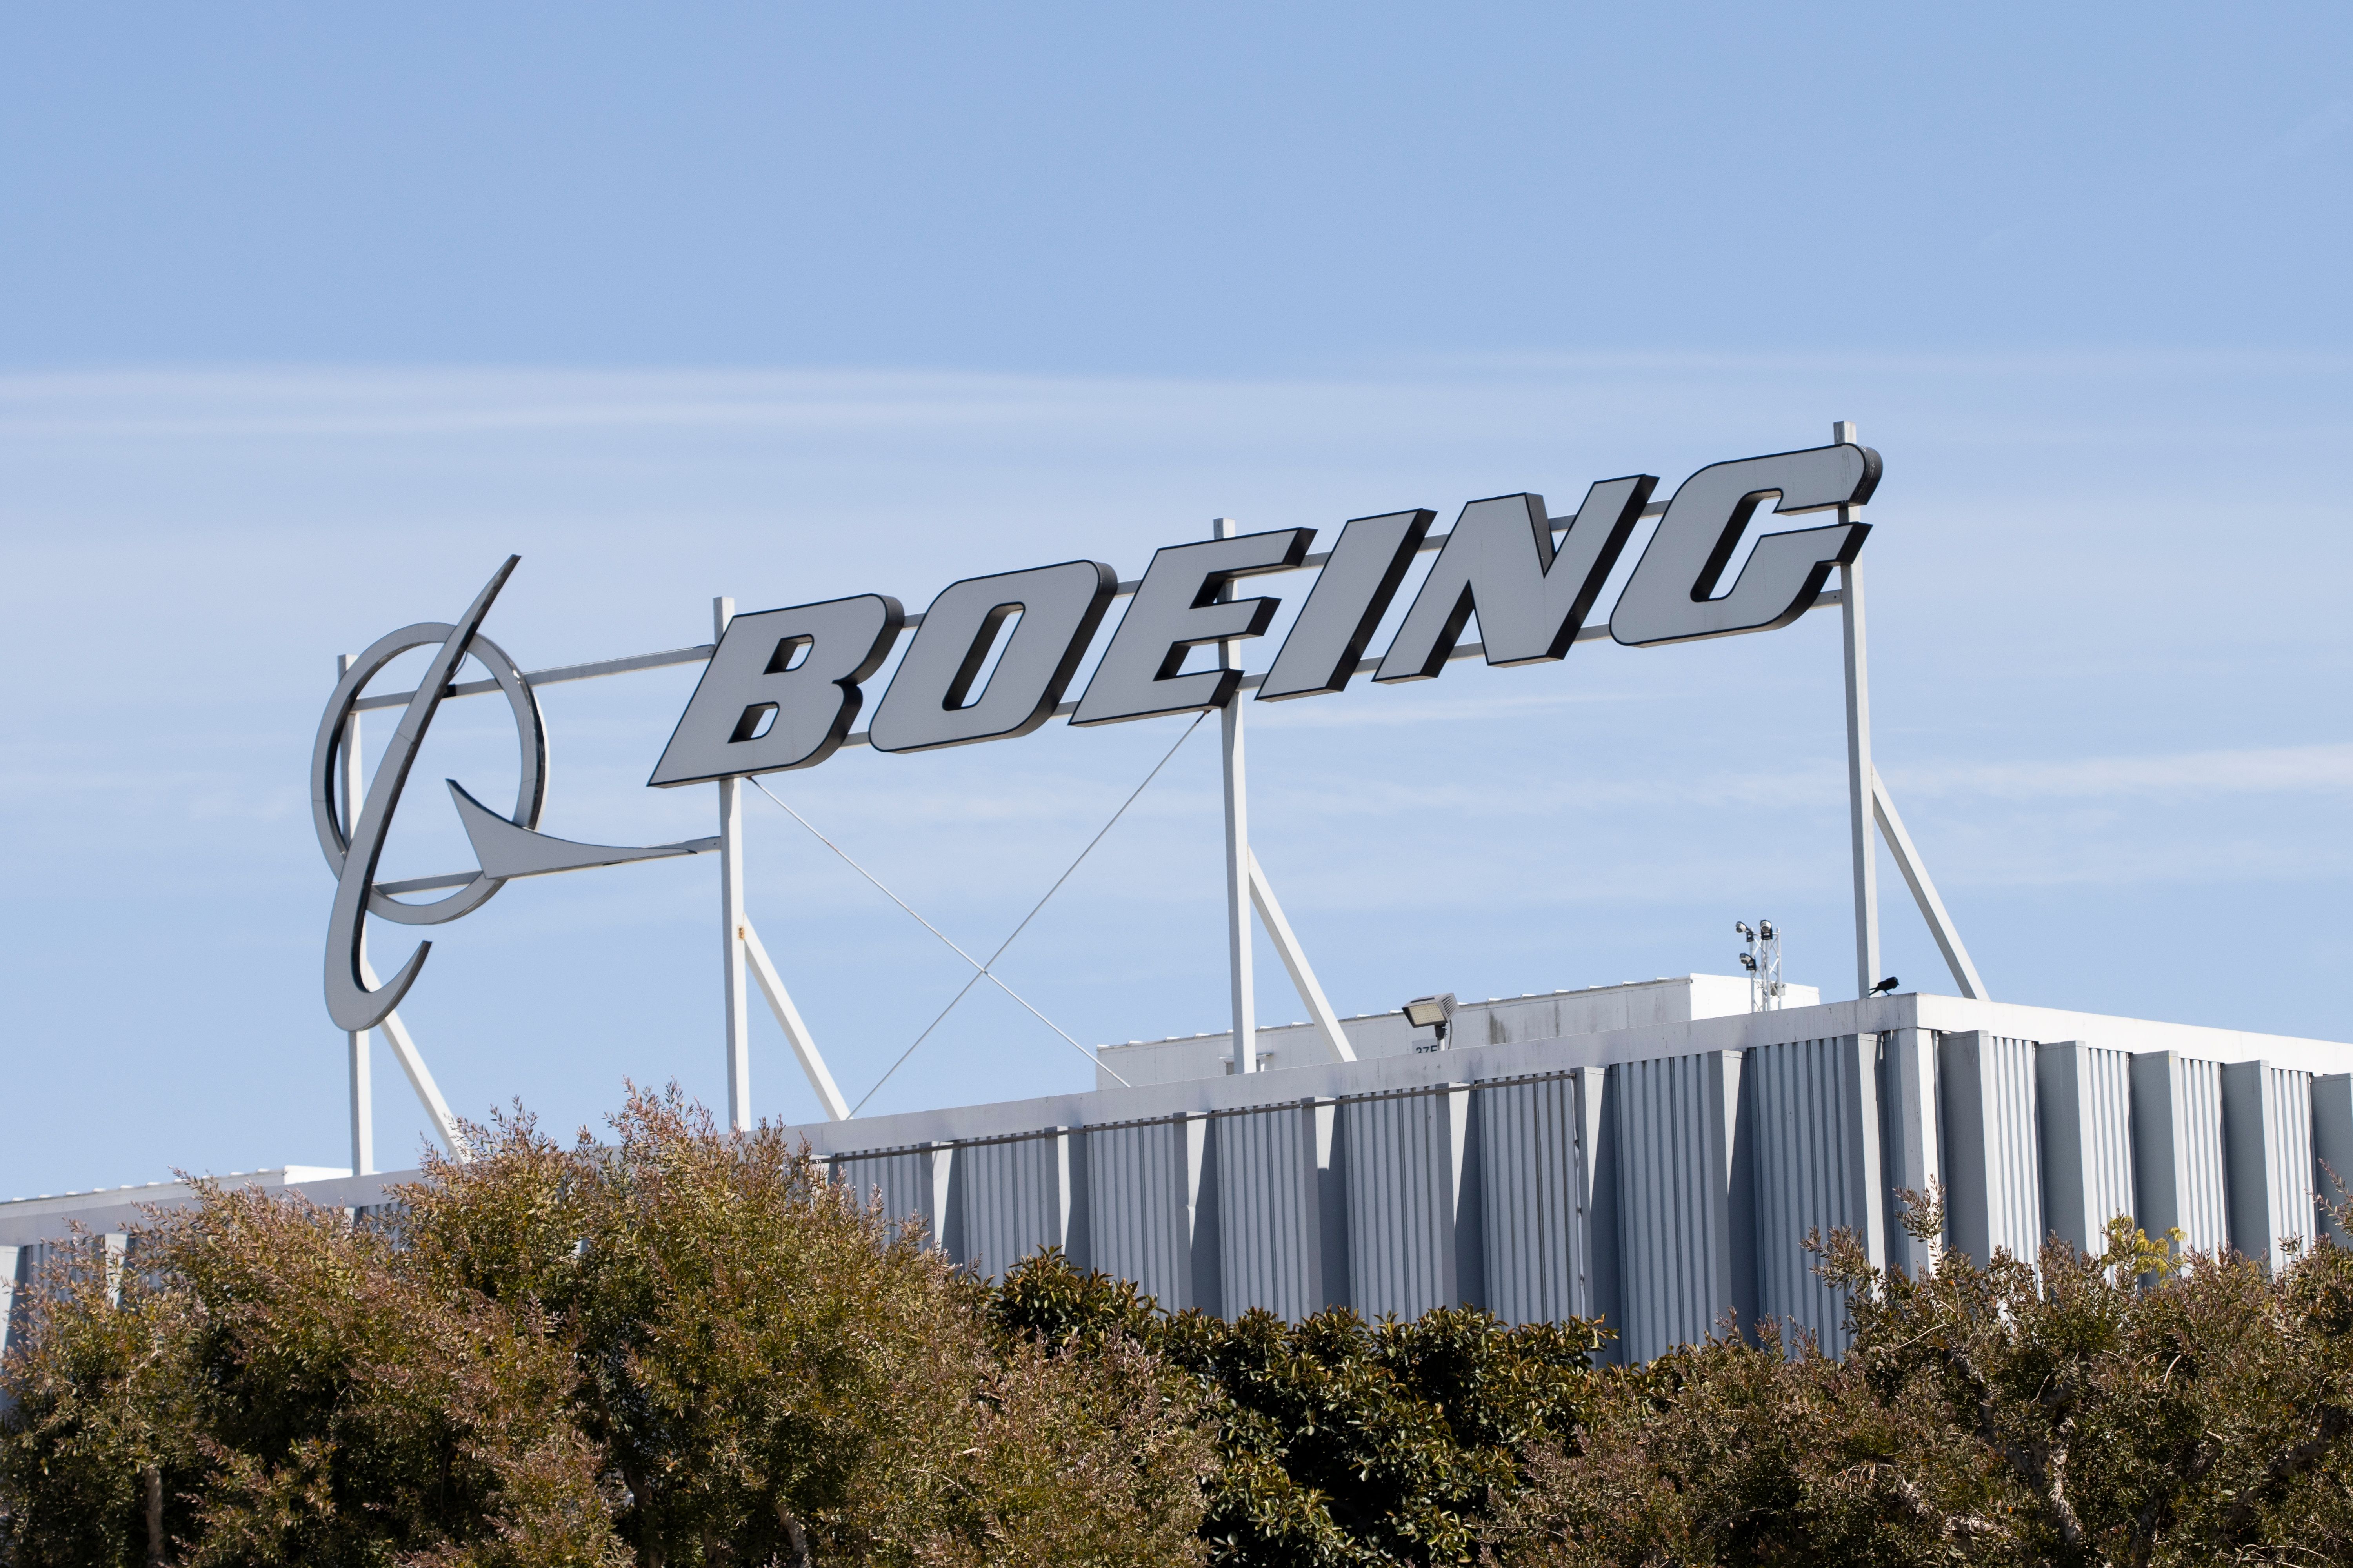 Boeing logo on one of its buildings in California